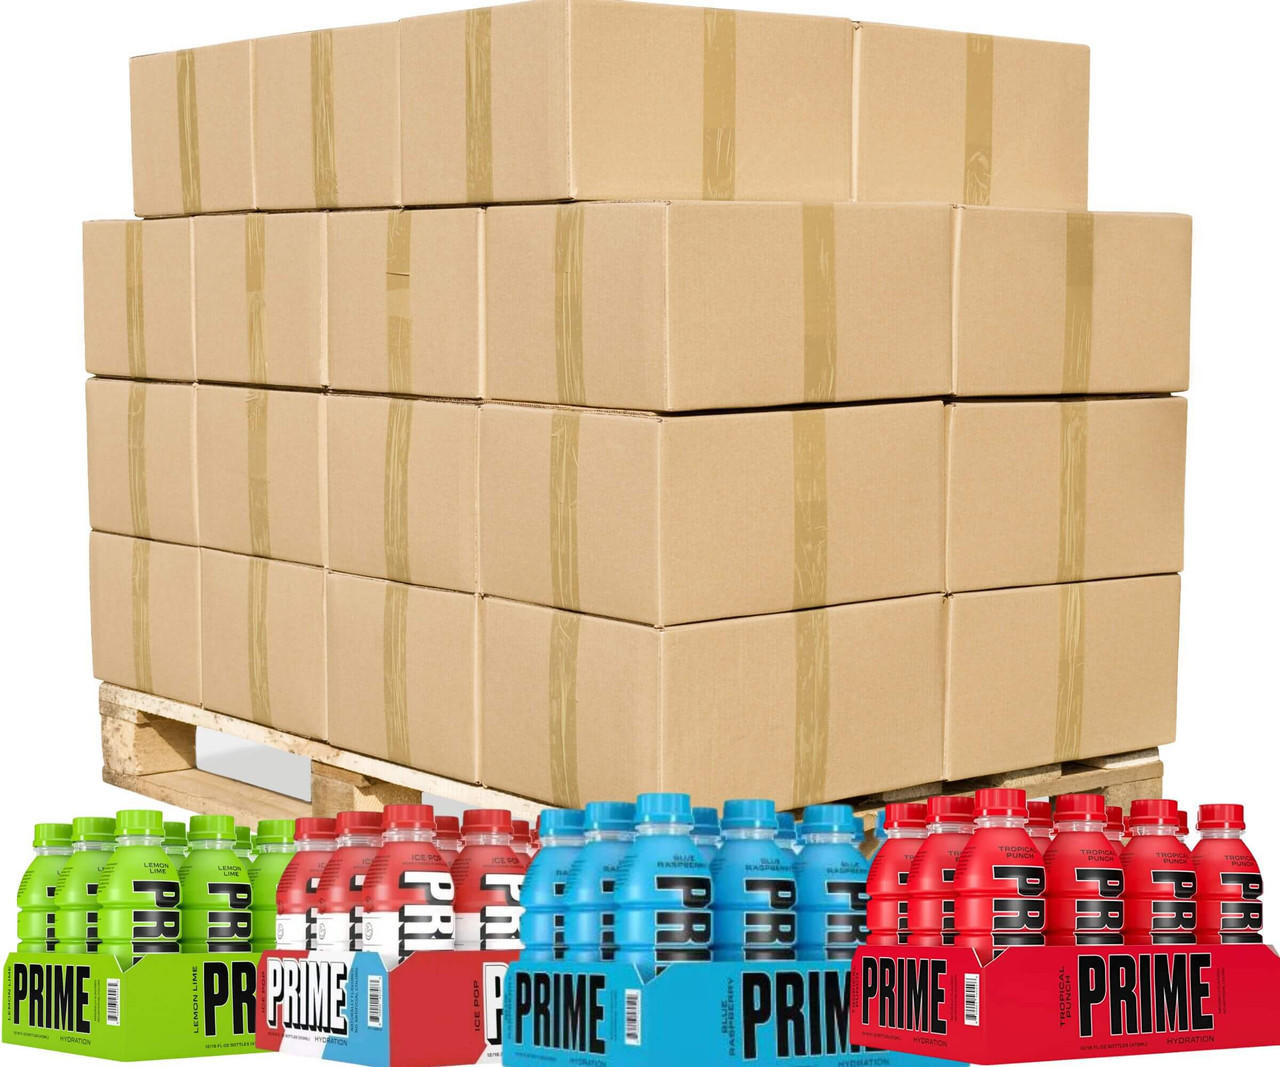  Prime Hydration Drink | Assorted Flavors | 16oz | 12/Pack | 119 ct Pallet | Lemon Lime, Blue Raspberry, Tropical Punch, Ice Pop 